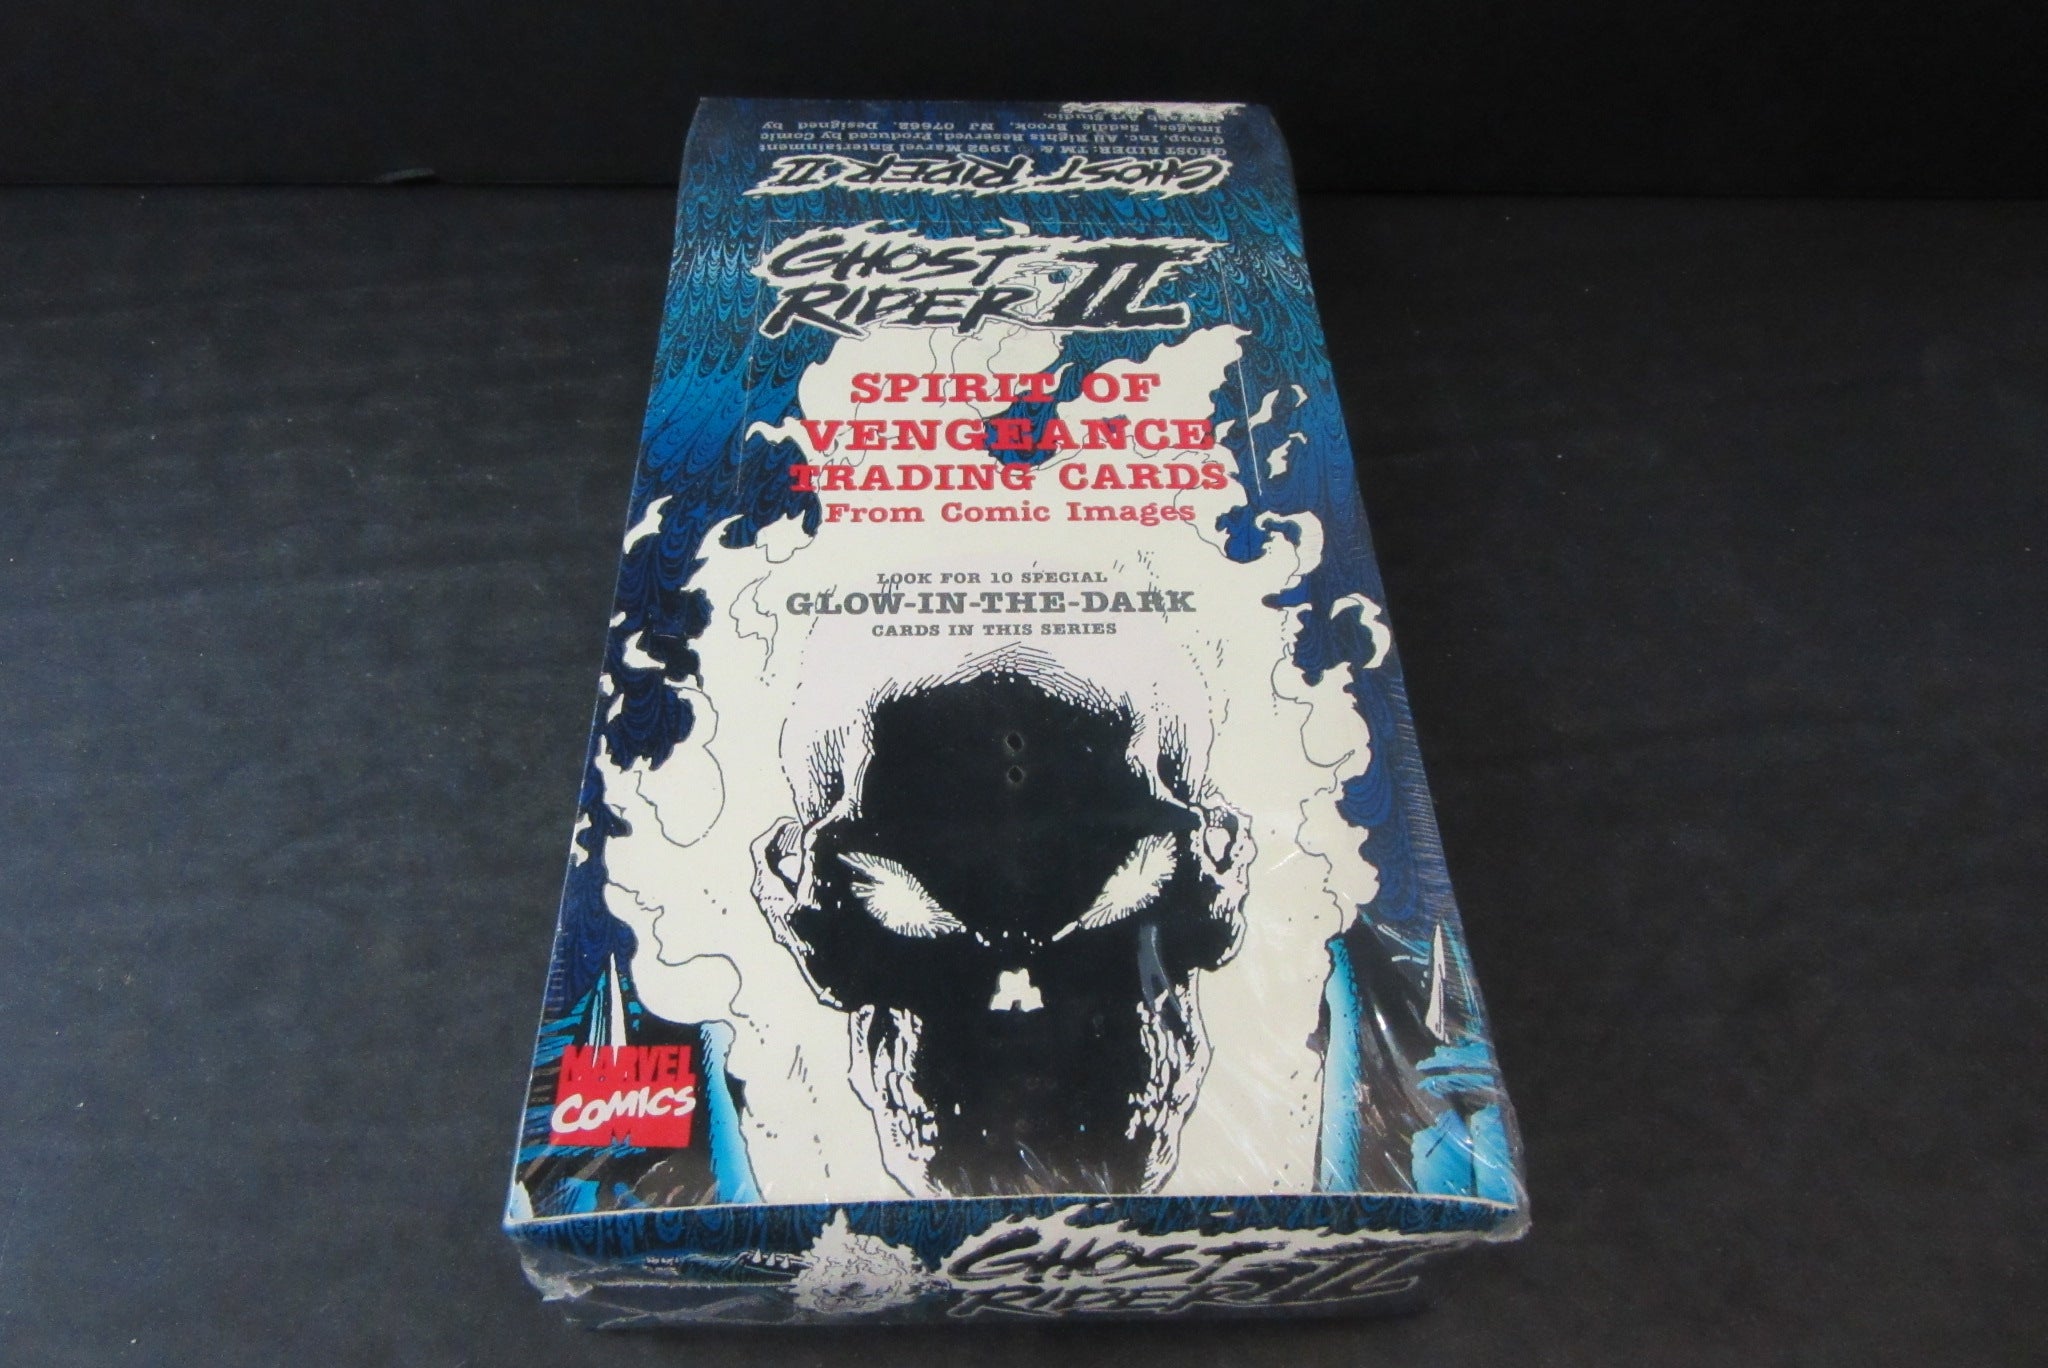 1992 Comic Images Ghost Rider 2 Box